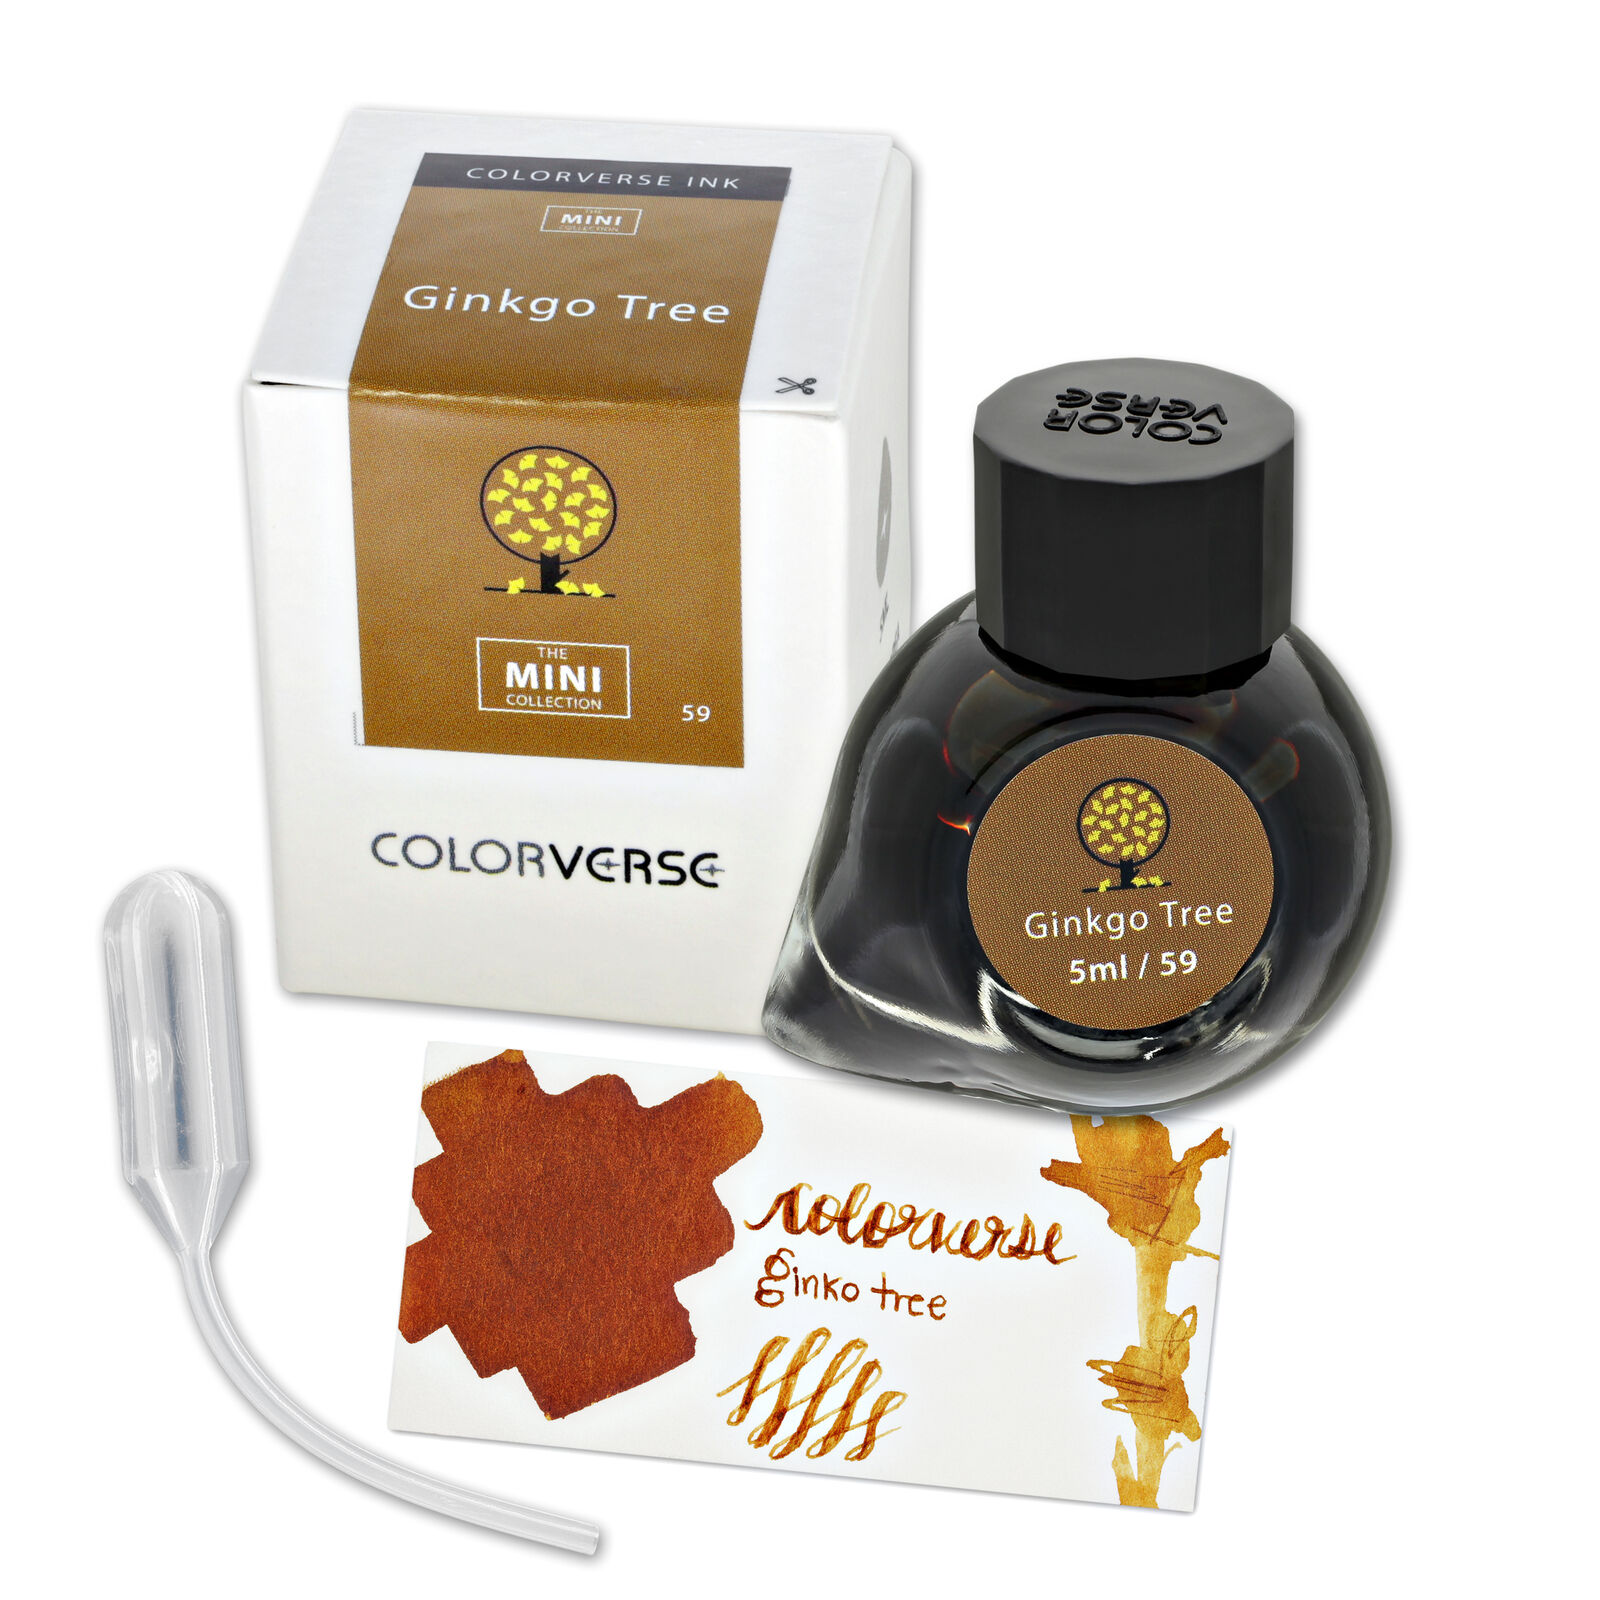 Colorverse Earth Edition Mini Bottled Ink in Ginko Tree - 5mL - NEW in Box